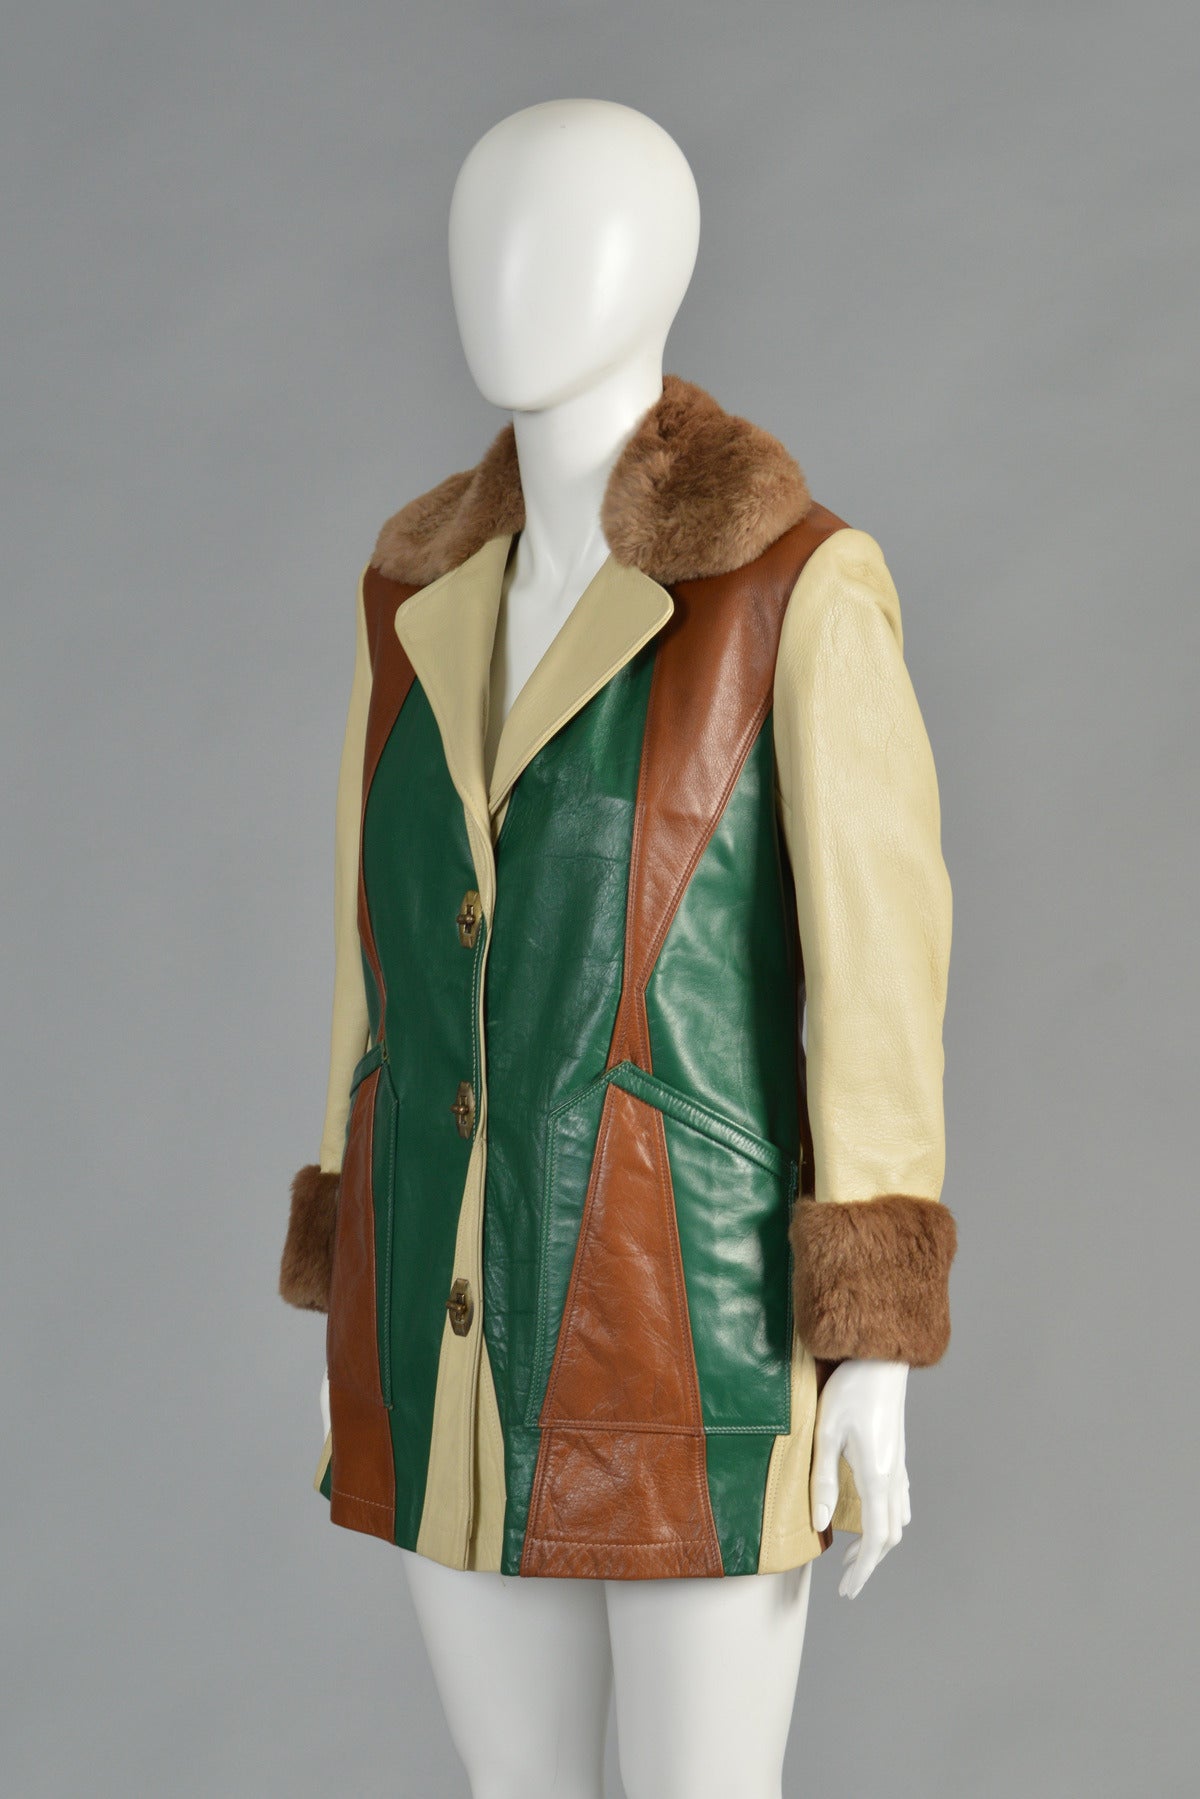 Absolutely awesome 1970's patchwork leather jacket. AMAZING piece! One-of-a-kind custom made piece. Killer pie-piece patchwork leather in green, pale yellow and sienna. Sheared beaver collar and cuffs with genuine shearling lining. Super skinny cut